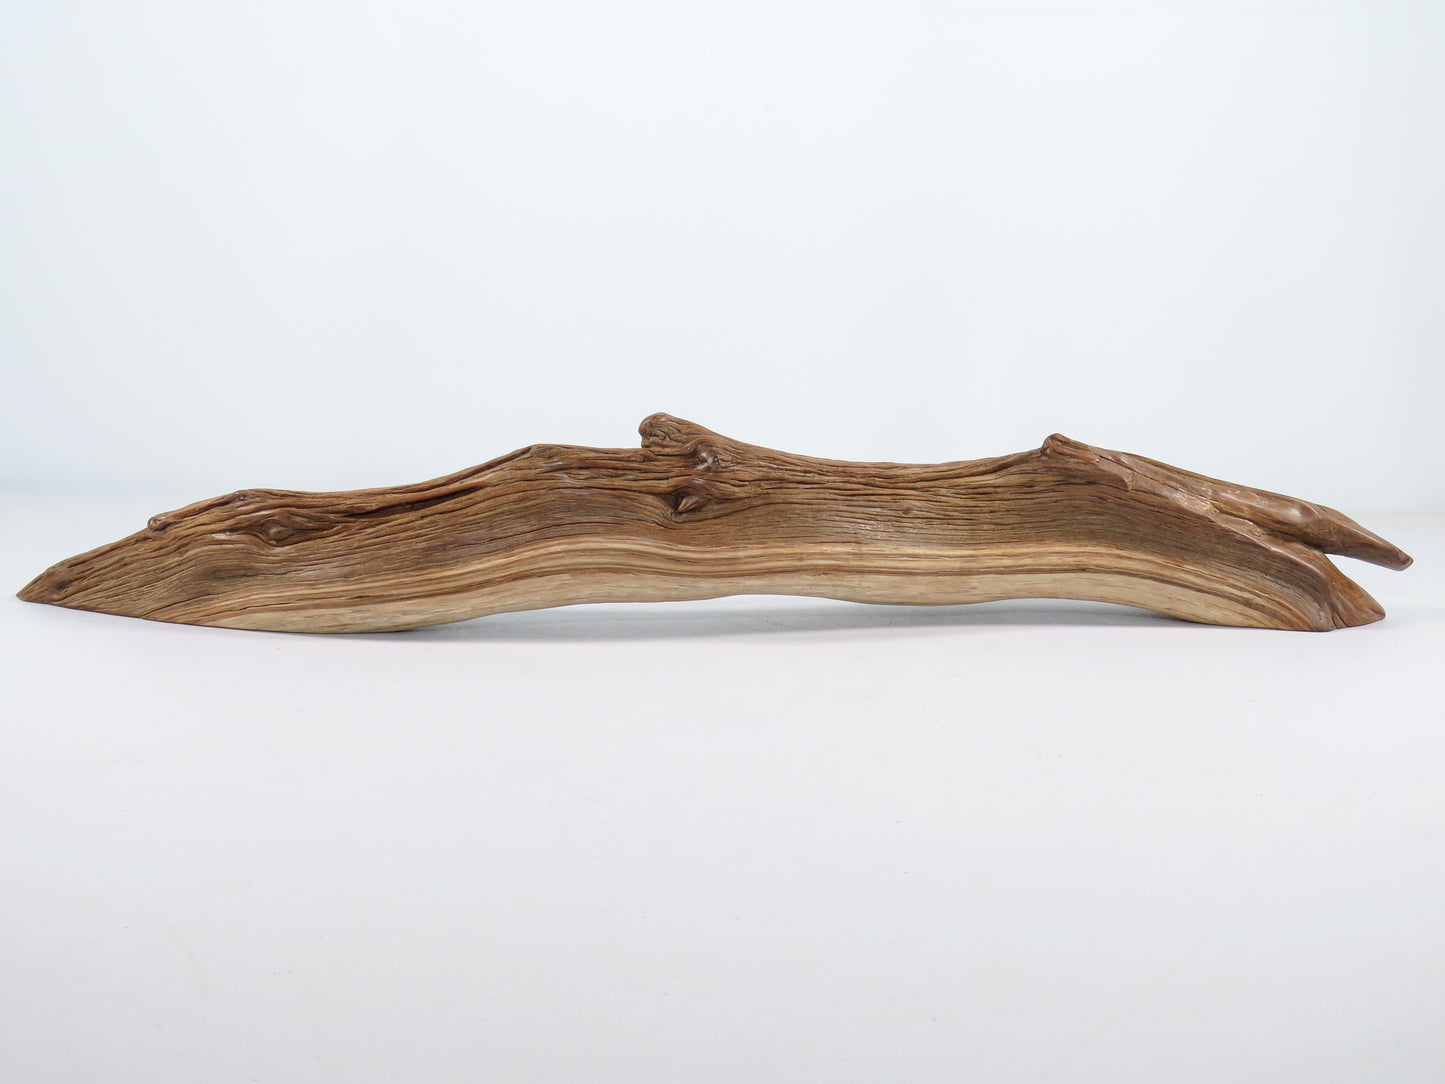 Manzanita Driftwood (21“), Unique, Arched, and perfect for beach house gifts, nautical or aquascape decor